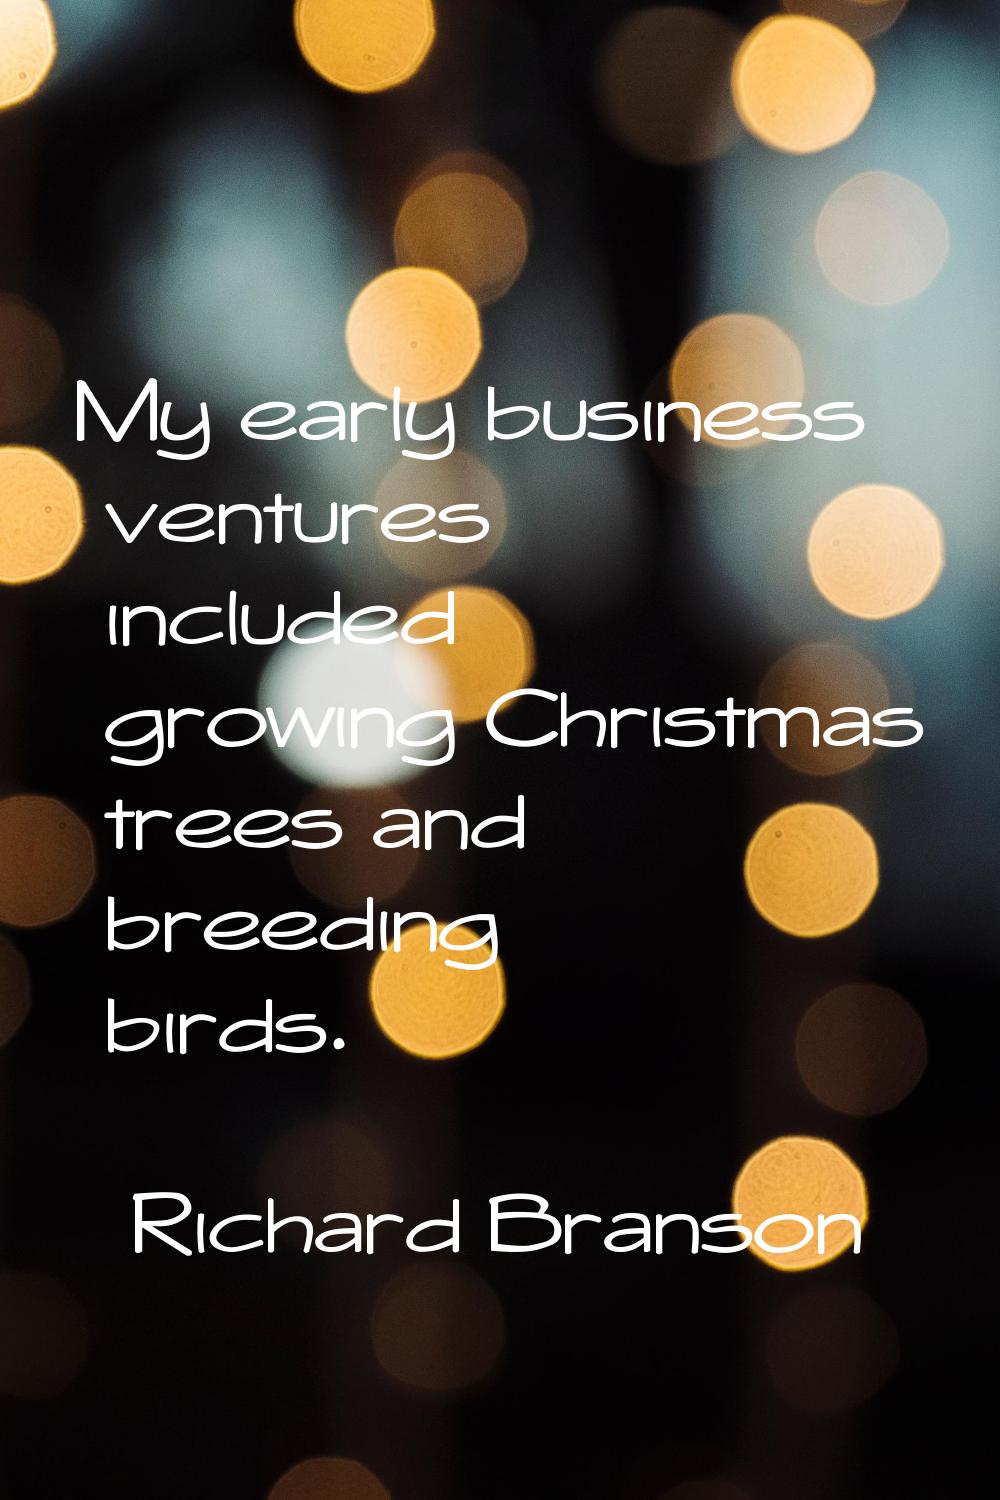 My early business ventures included growing Christmas trees and breeding birds.